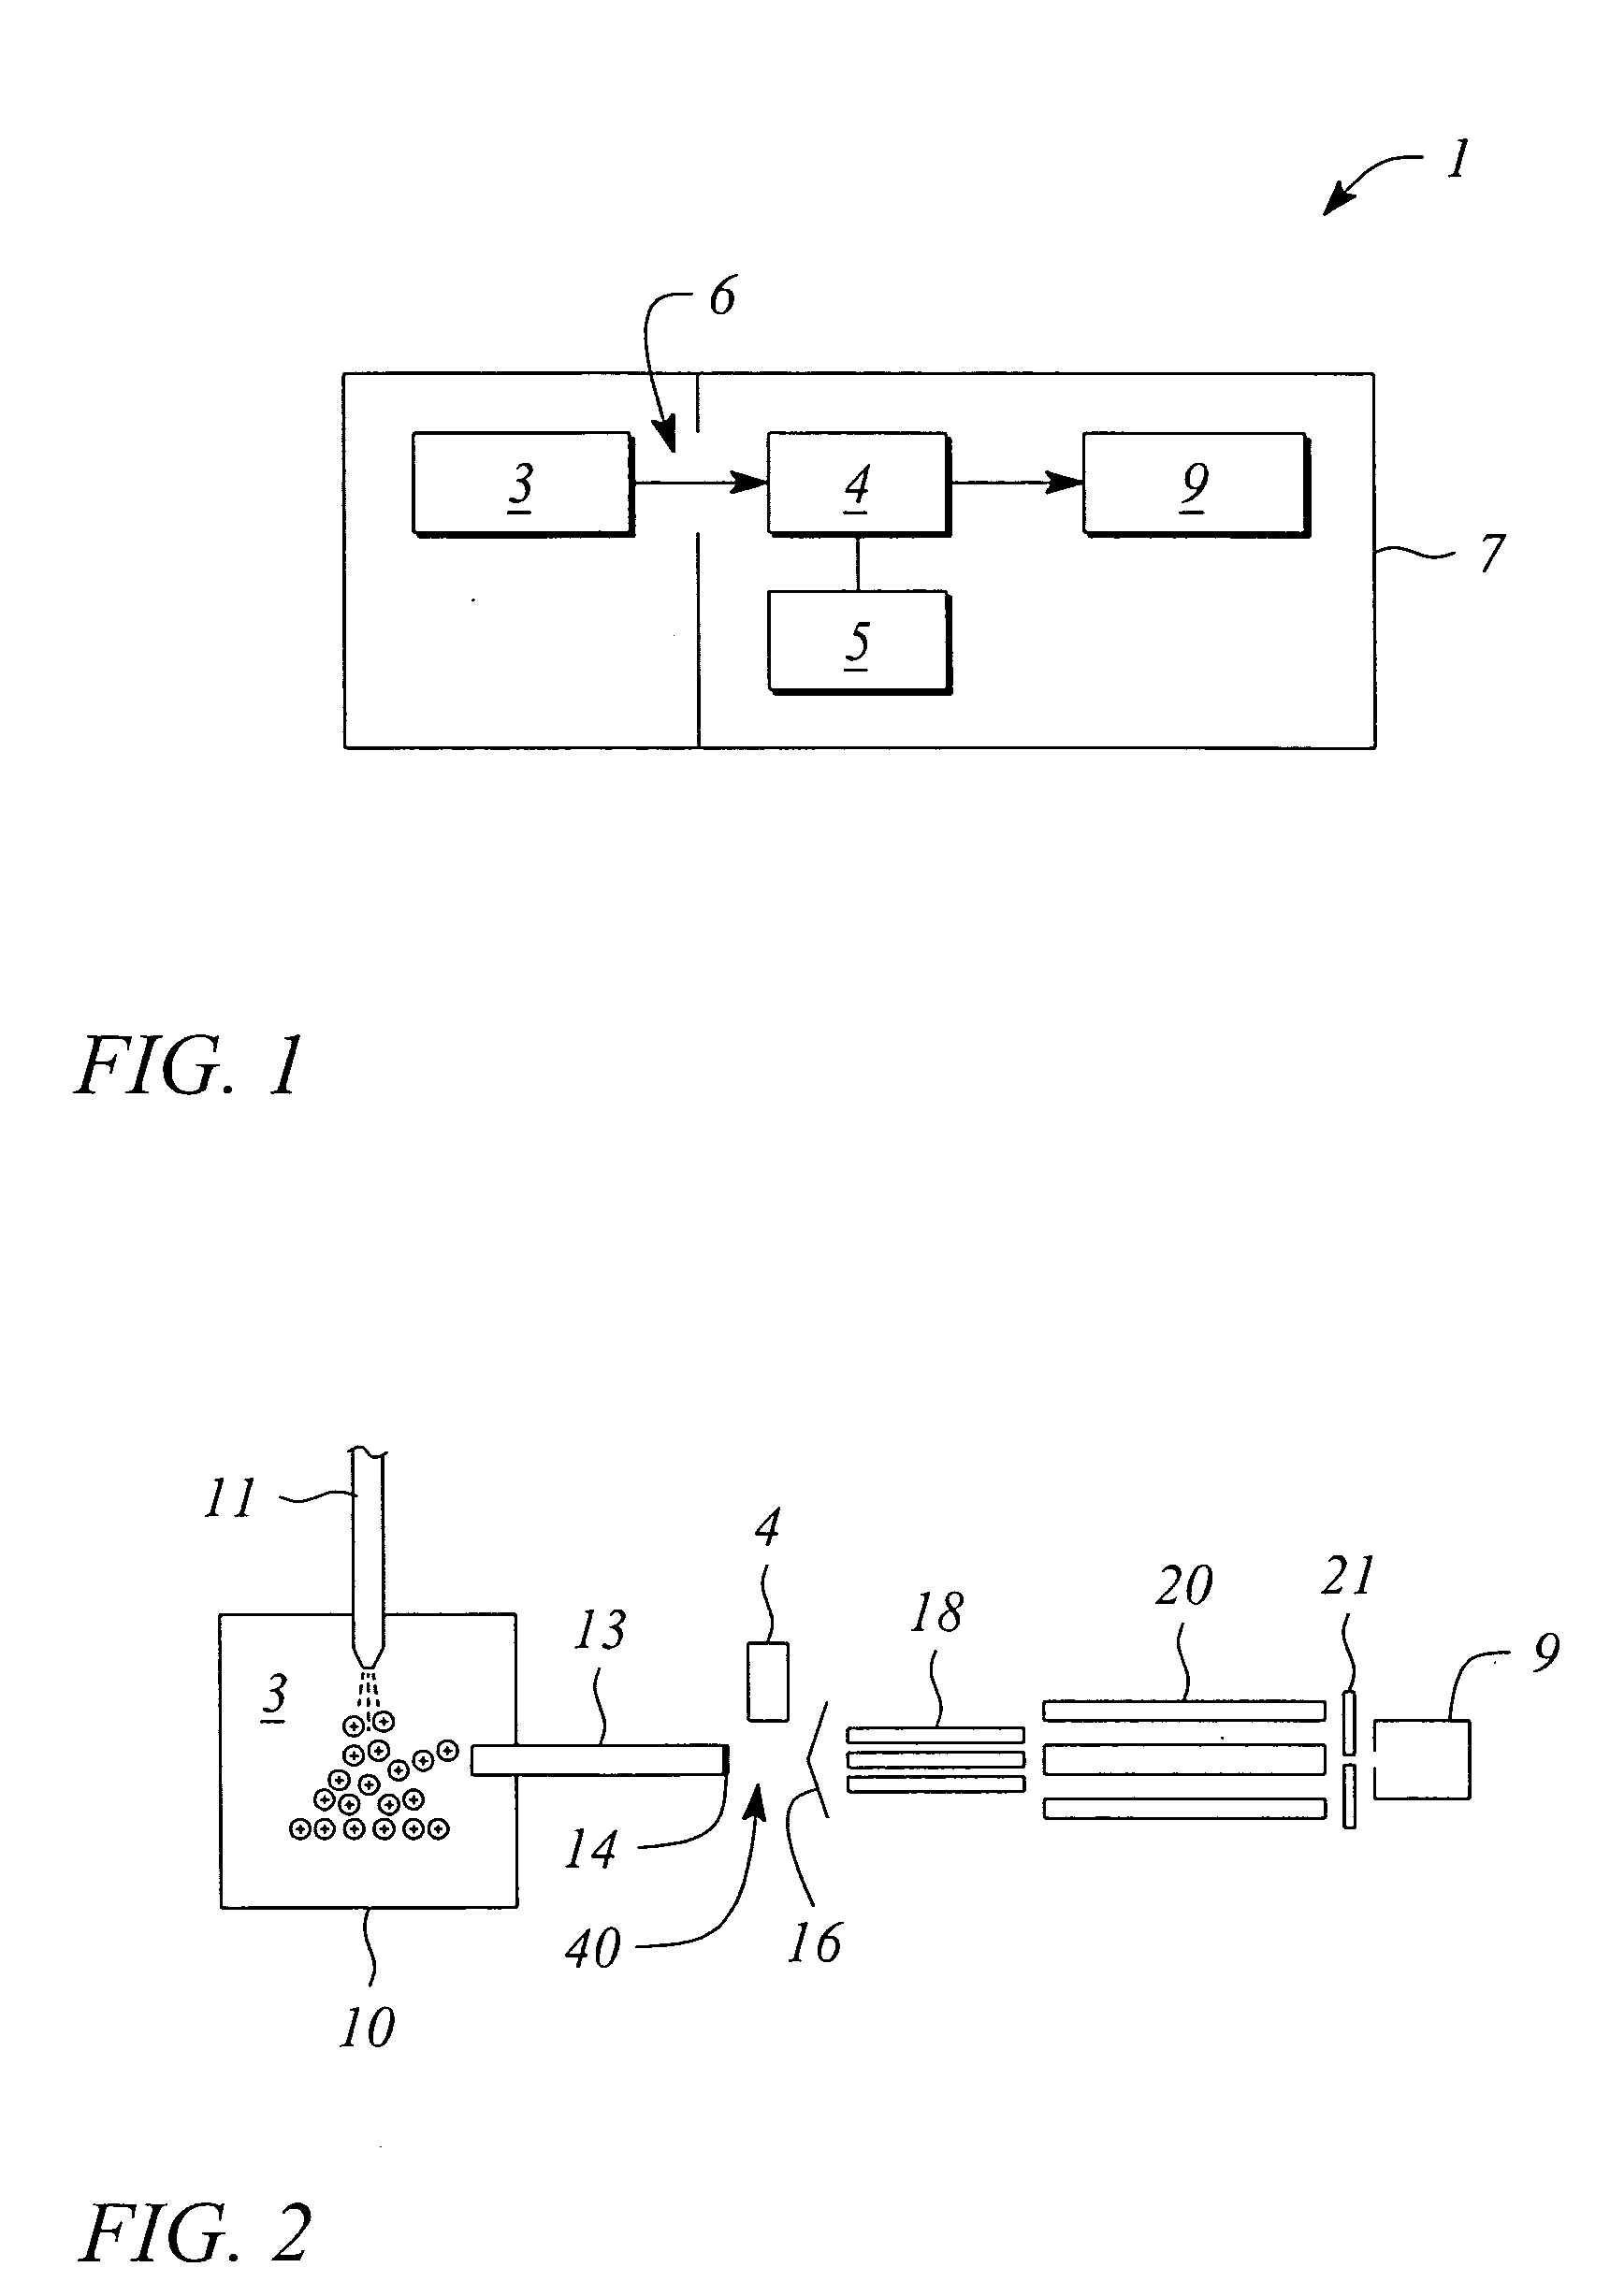 Photoactivated collision induced dissociation (PACID) (apparatus and method)